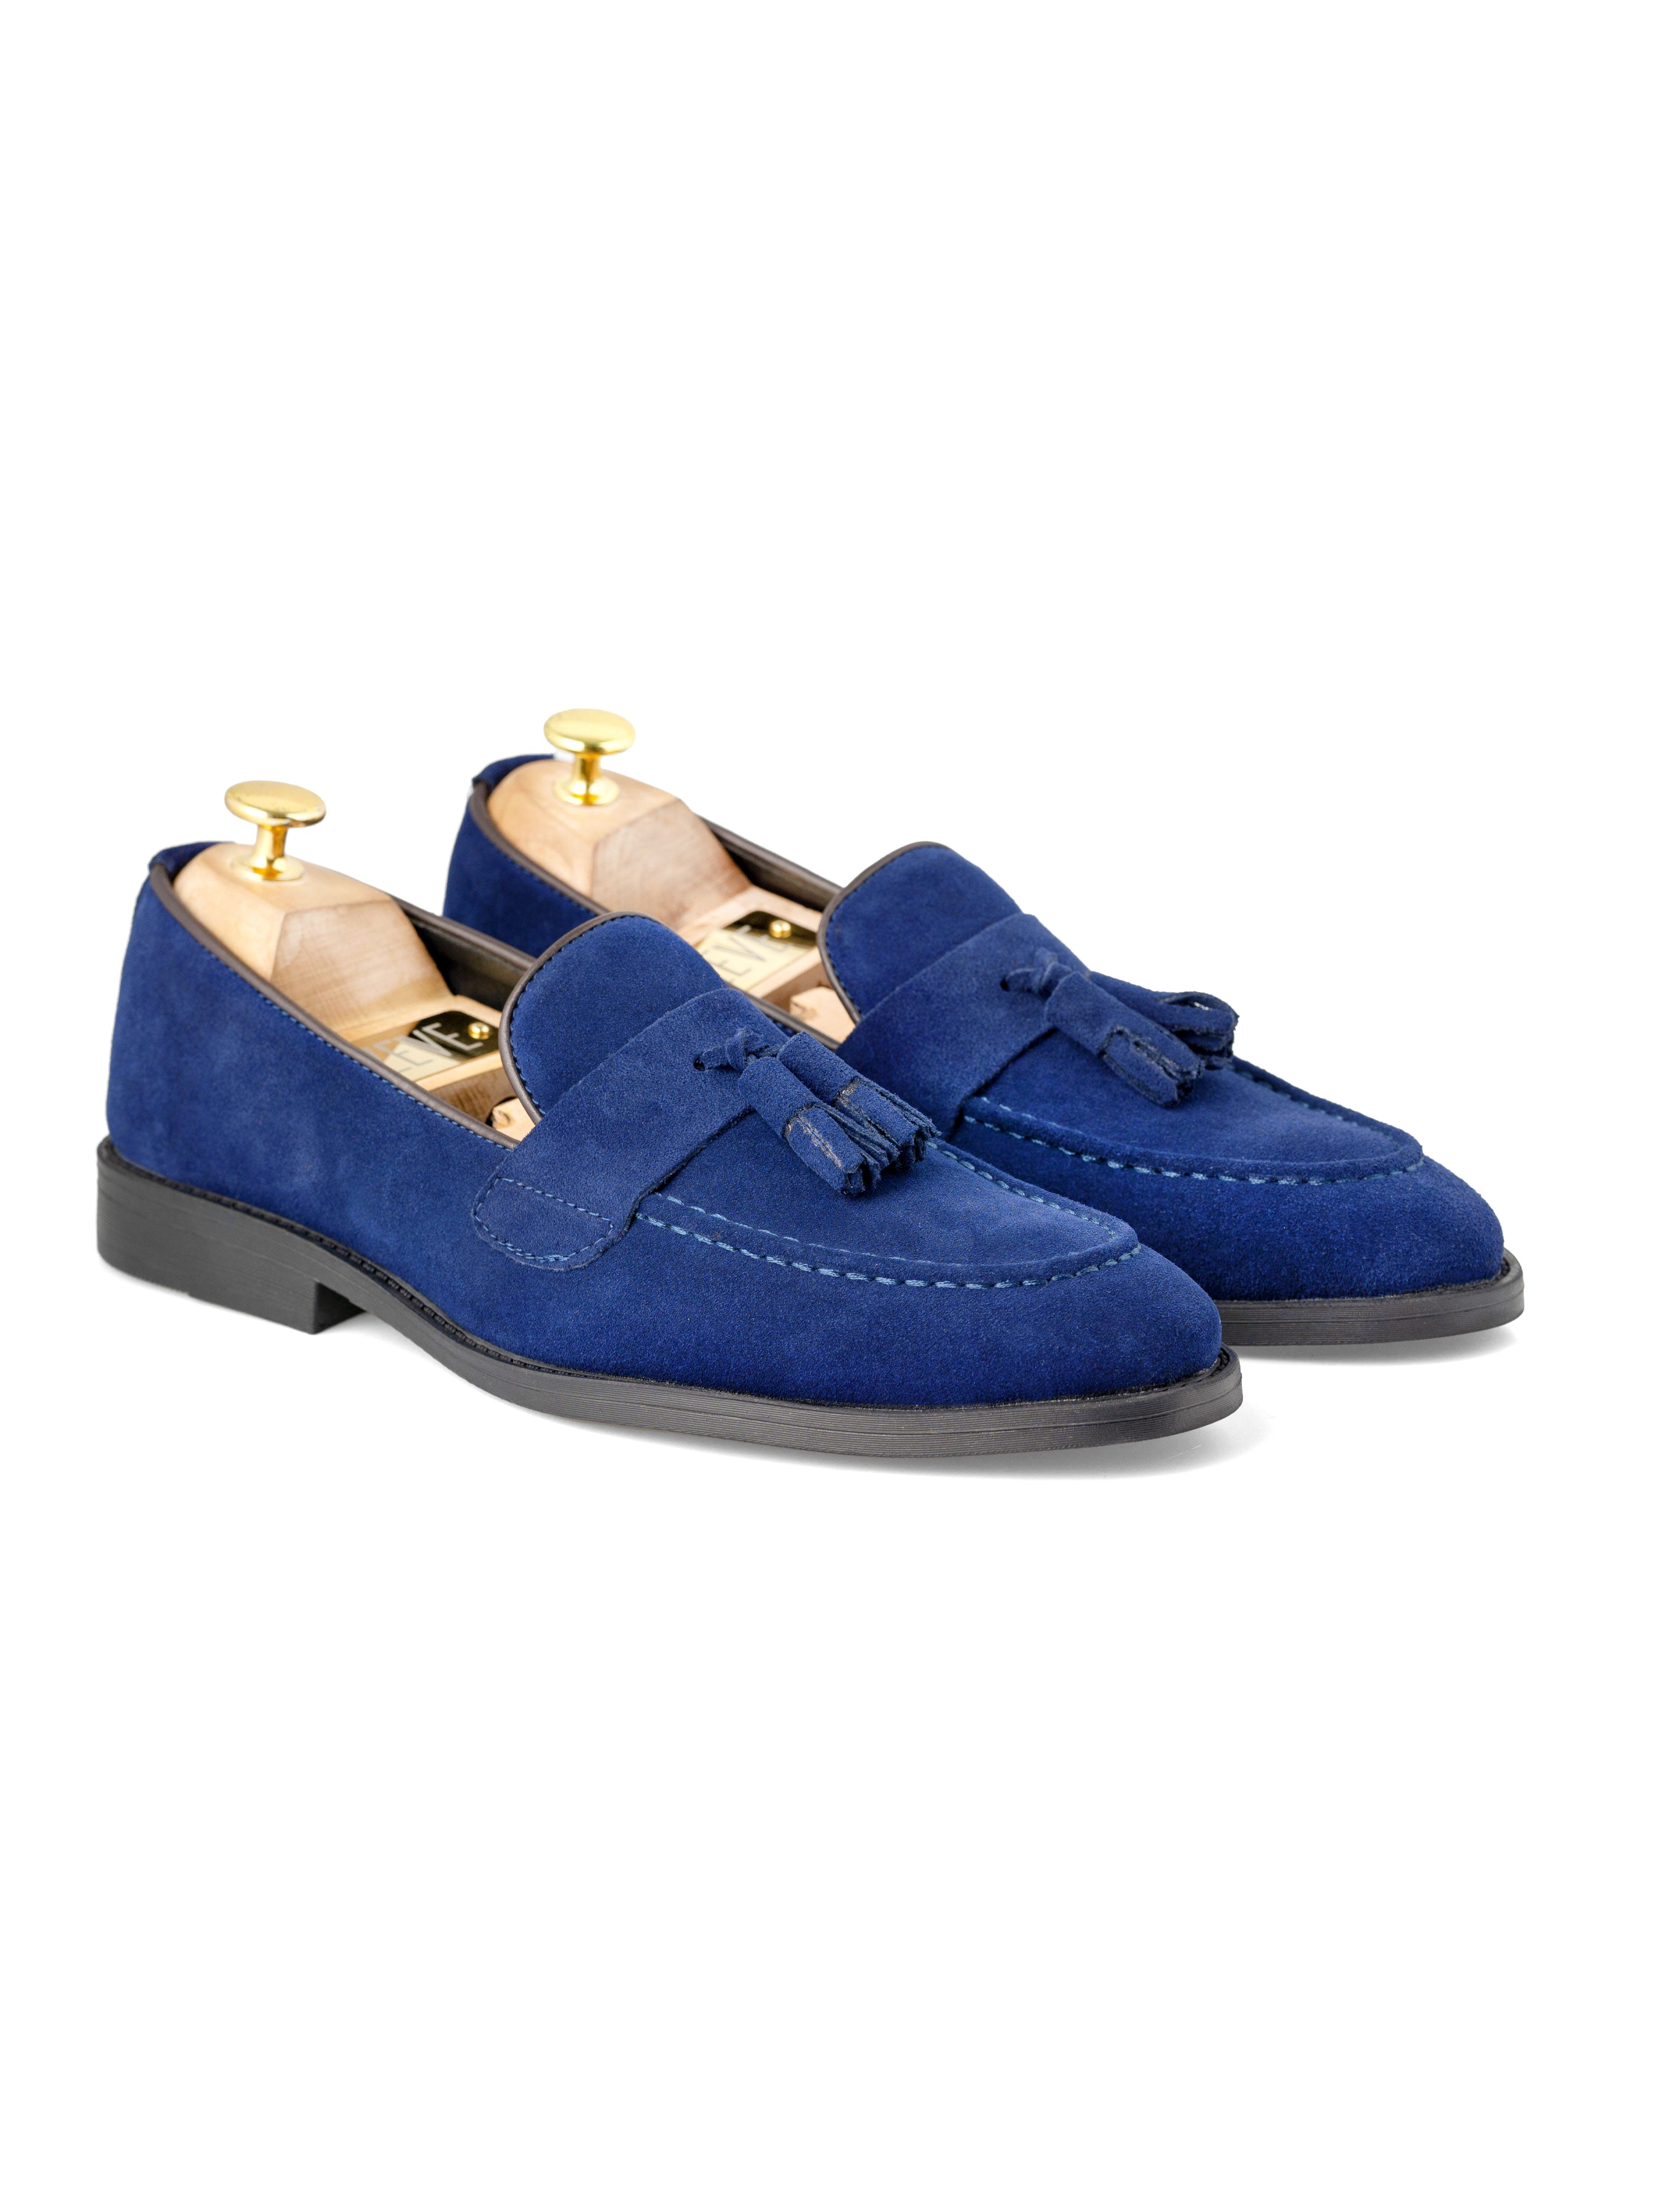 Rocky Tassel Loafer - Royal Blue Suede Leather (Flexi-Sole)